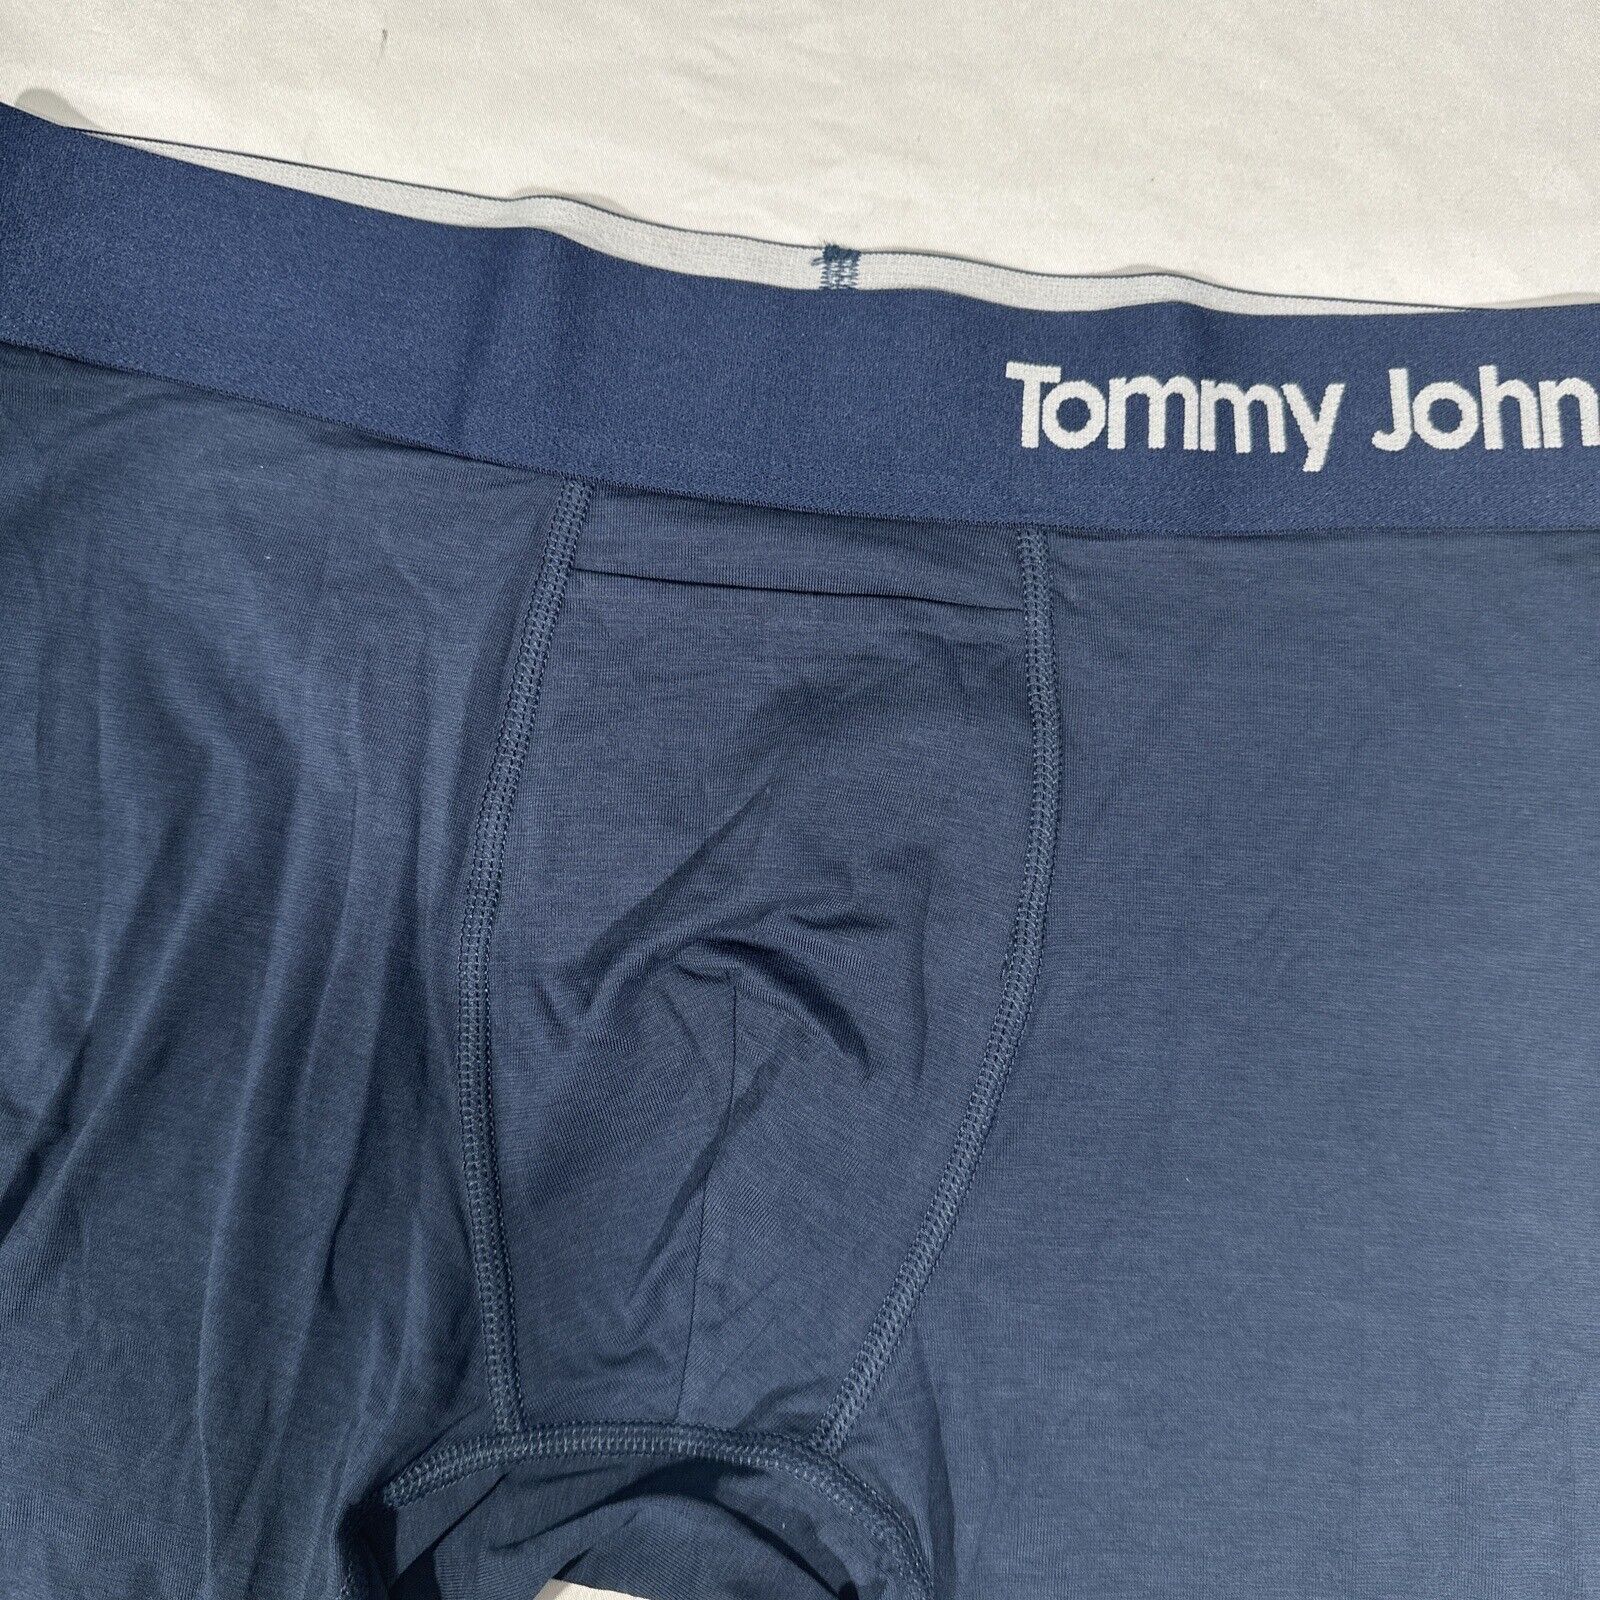 NWT $32 TOMMY JOHN [ Medium ] Cool Cotton 6-Inch Boxer Briefs in